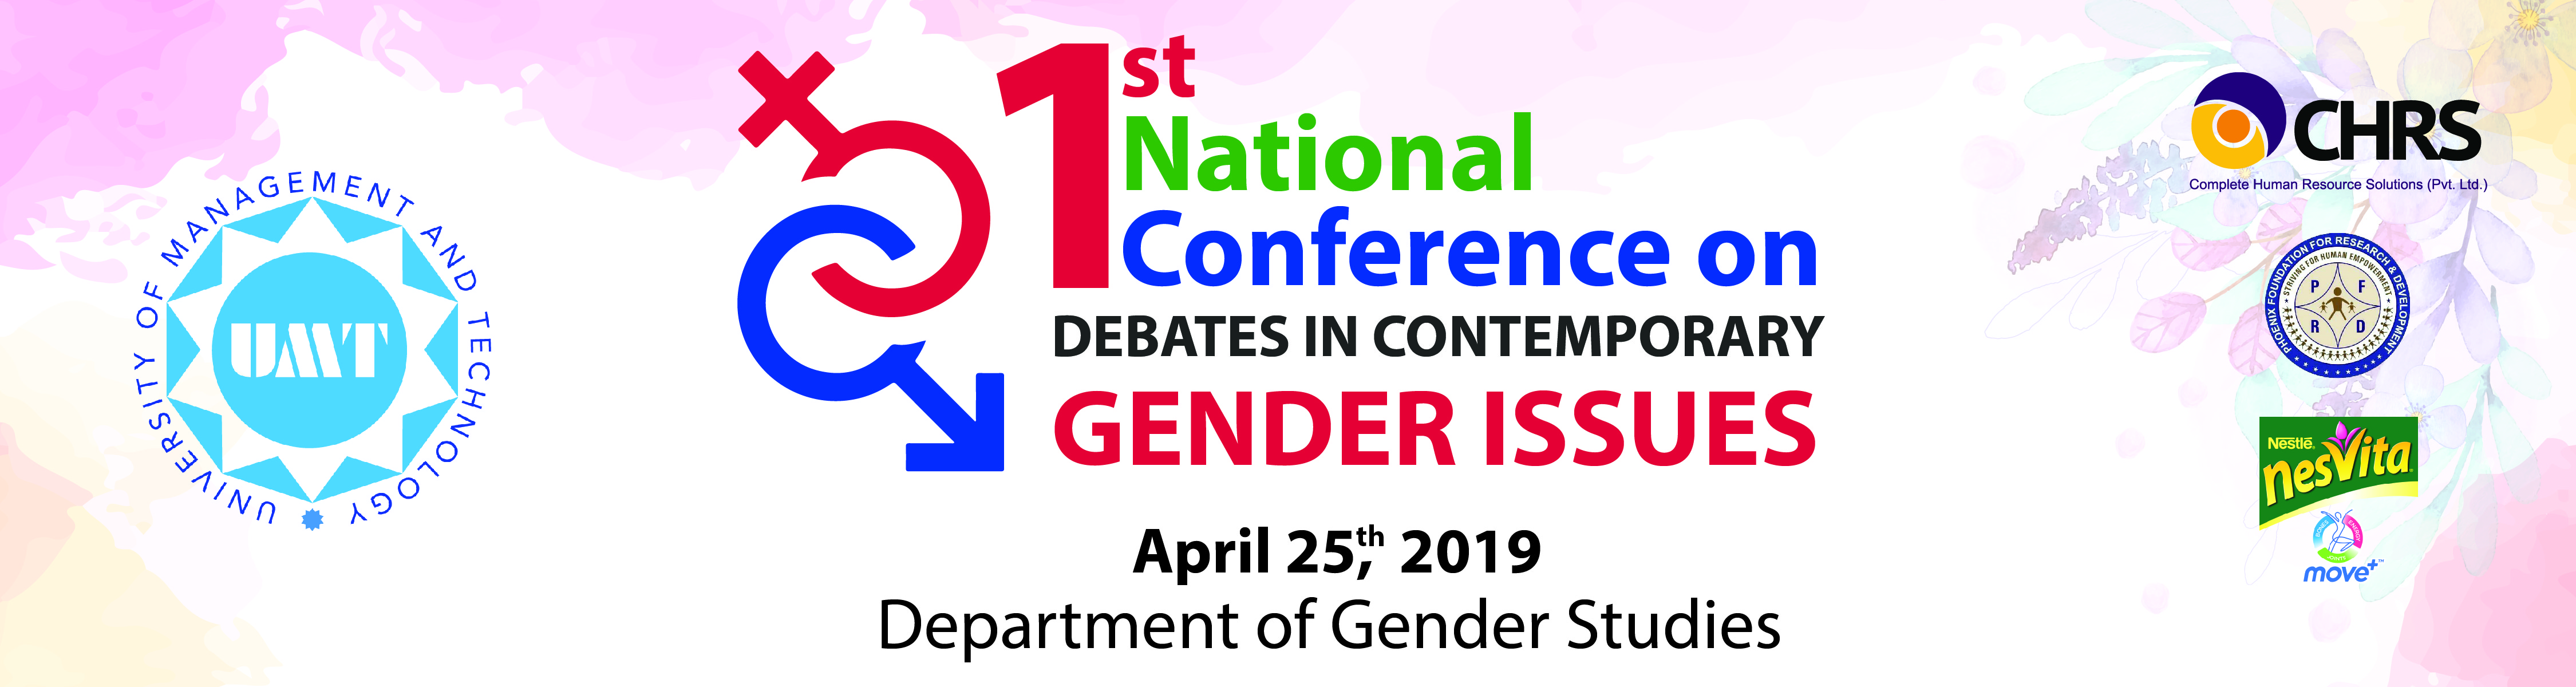 First National Conference on Debates in Contemporary Gender Issues